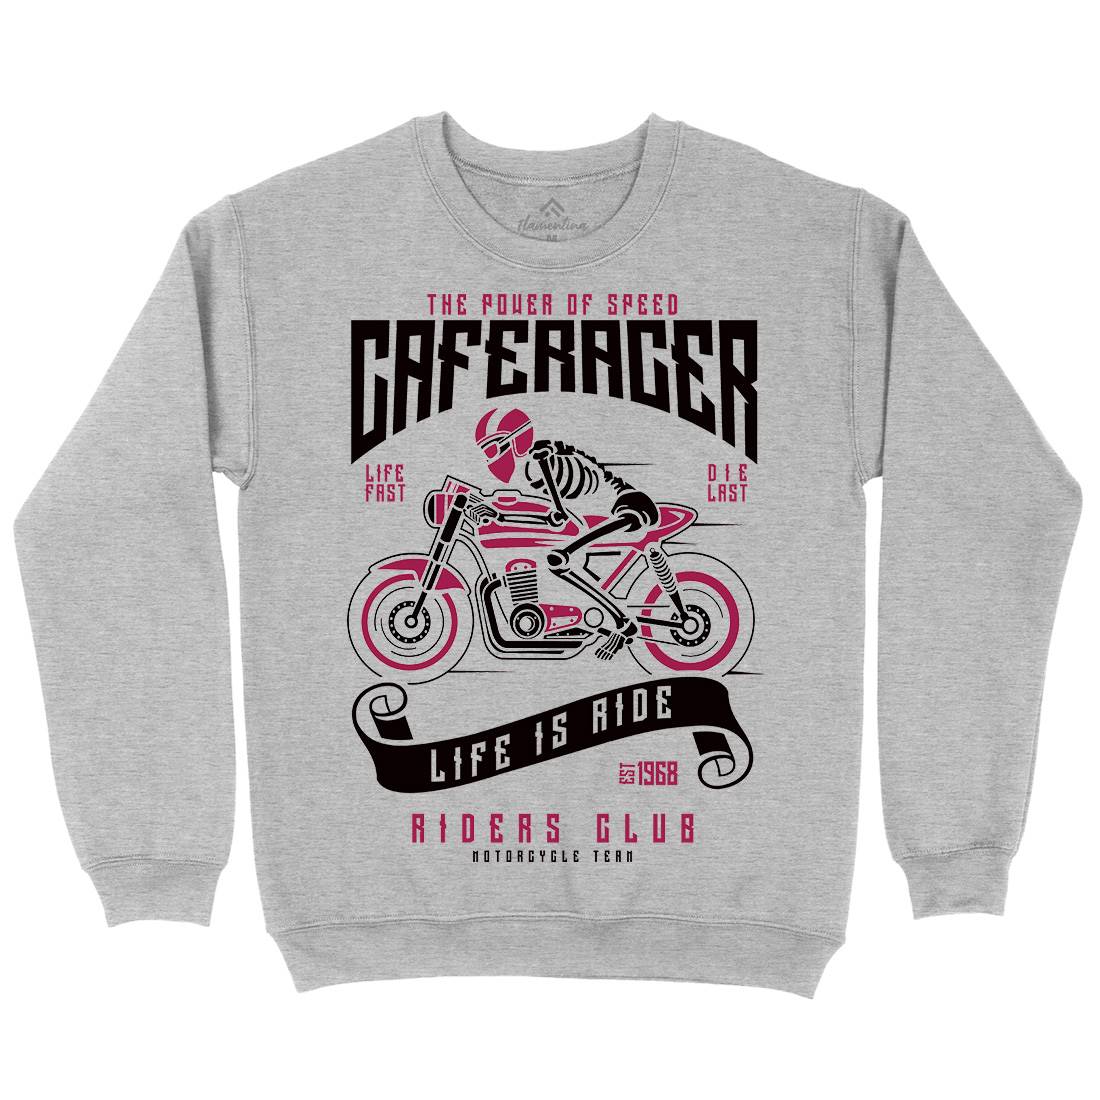 Speed Of Caferacer Mens Crew Neck Sweatshirt Motorcycles A154